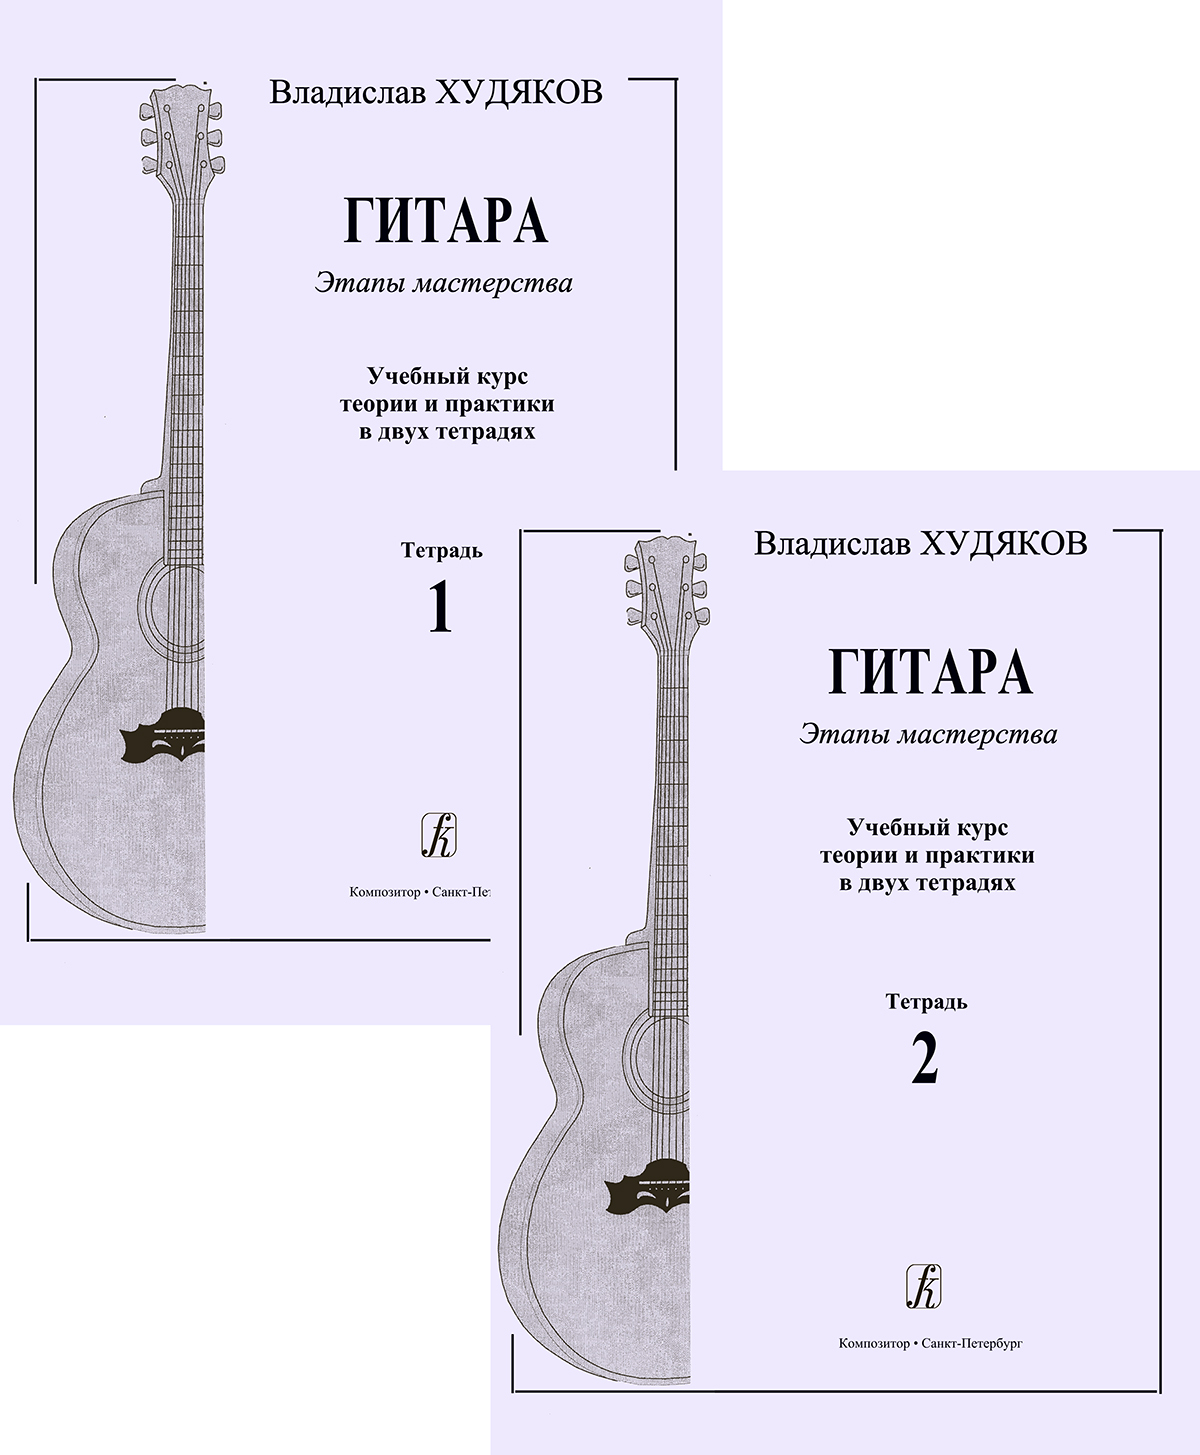 Khudyakov V. Guitar. Stages of skill. Educational course of theory and practice in two volumes